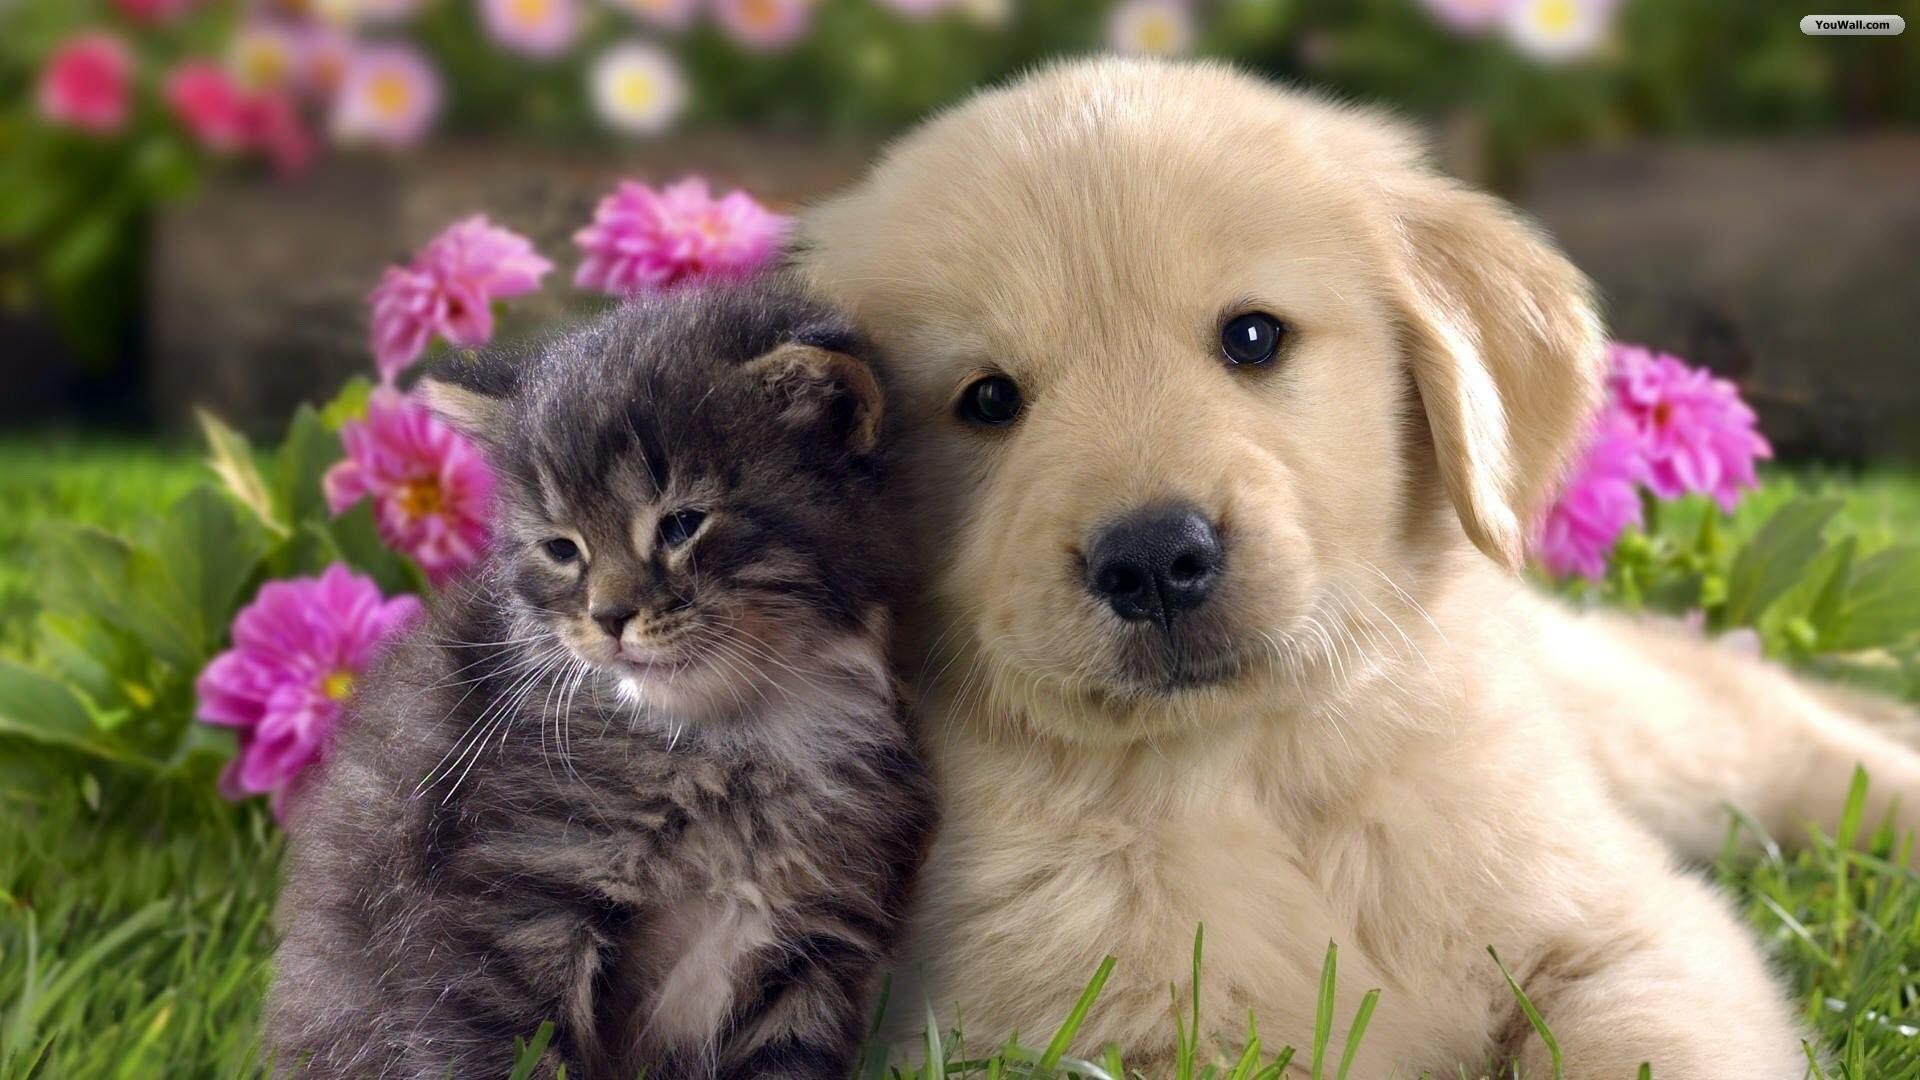 Cute Cats and Dogs Wallpaper